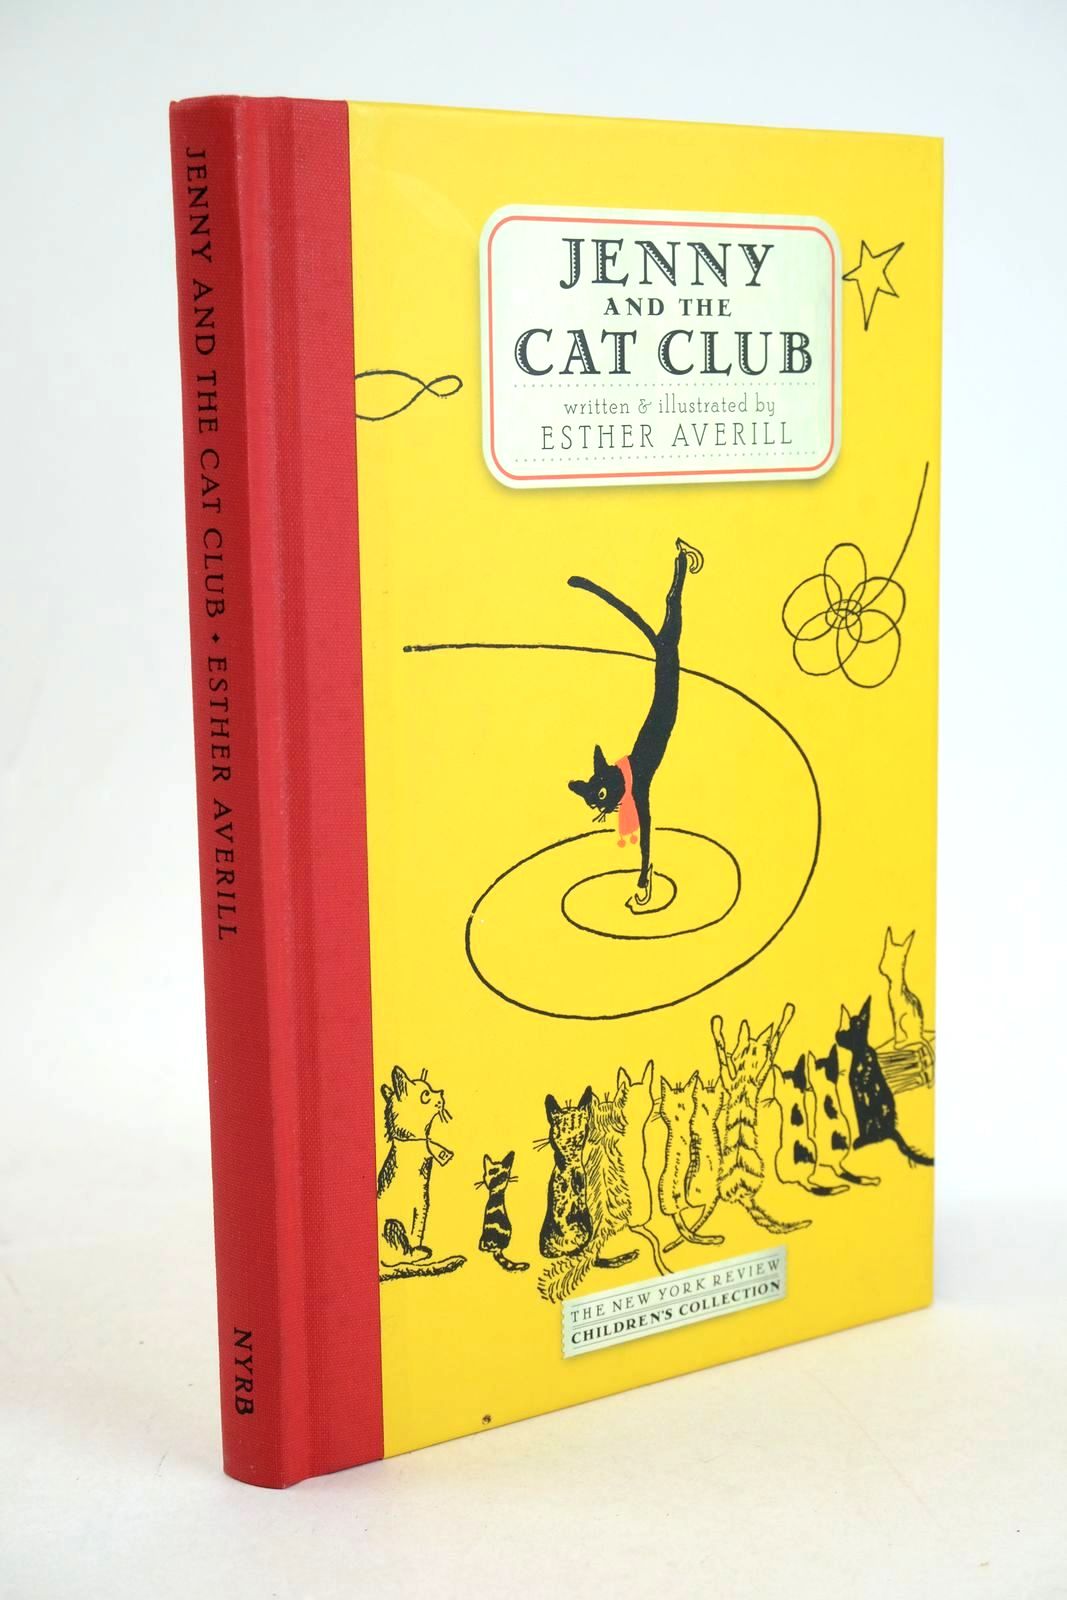 Photo of JENNY AND THE CAT CLUB written by Averill, Esther illustrated by Averill, Esther published by The New York Review Children's Collection (STOCK CODE: 1327745)  for sale by Stella & Rose's Books